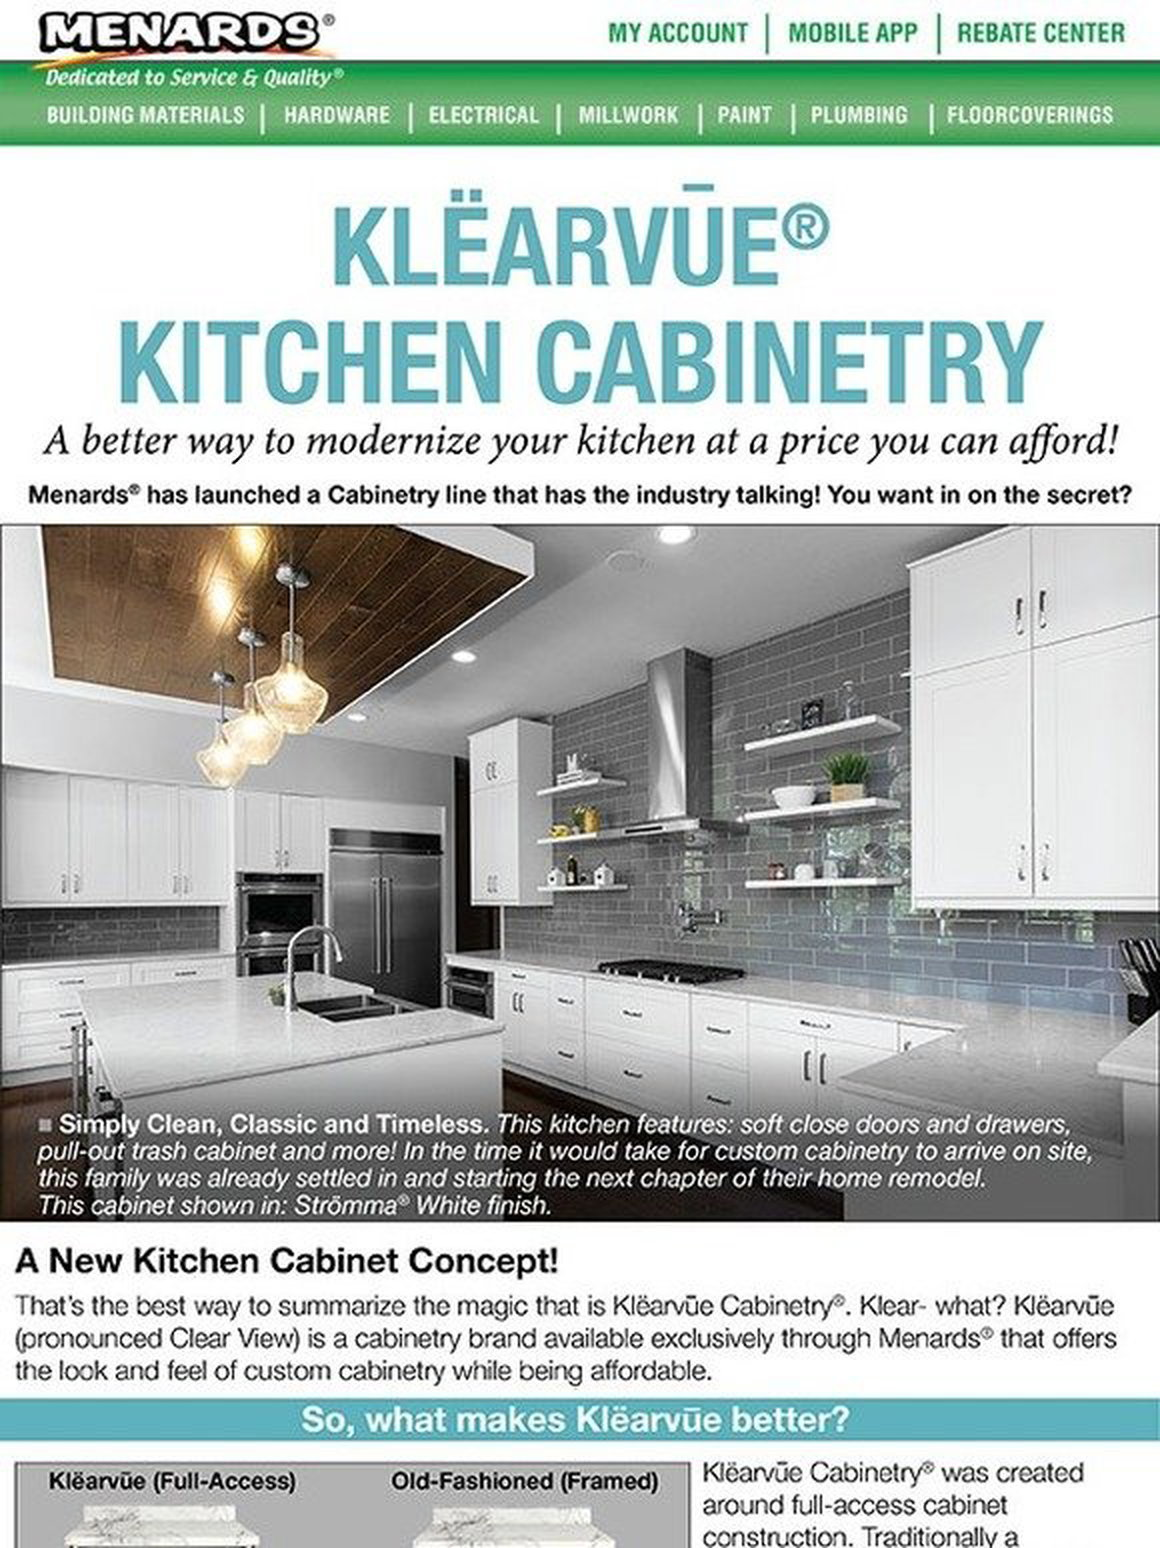 Menards Now Is The Time To Check Out Klearvue Kitchen Cabinetry